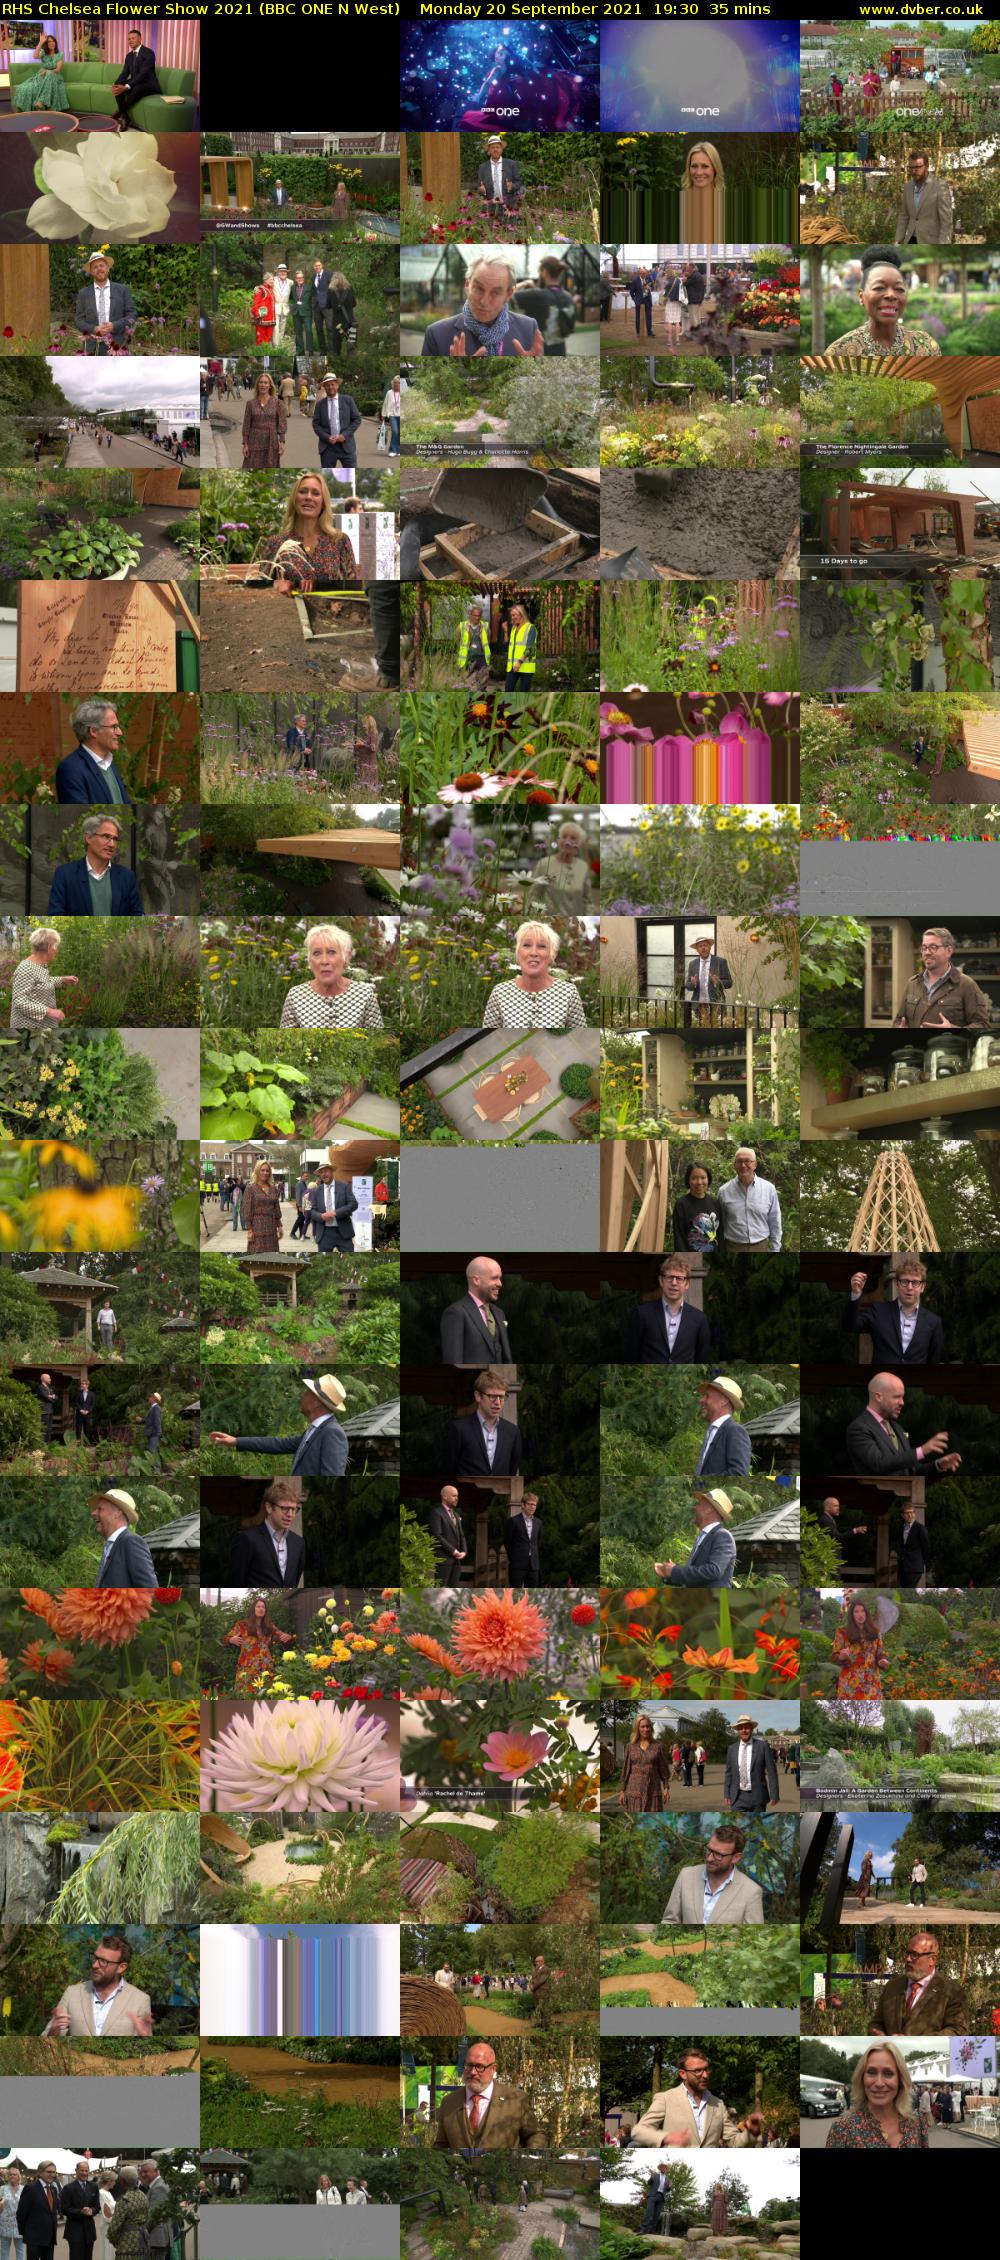 RHS Chelsea Flower Show 2021 (BBC ONE N West) Monday 20 September 2021 19:30 - 20:05